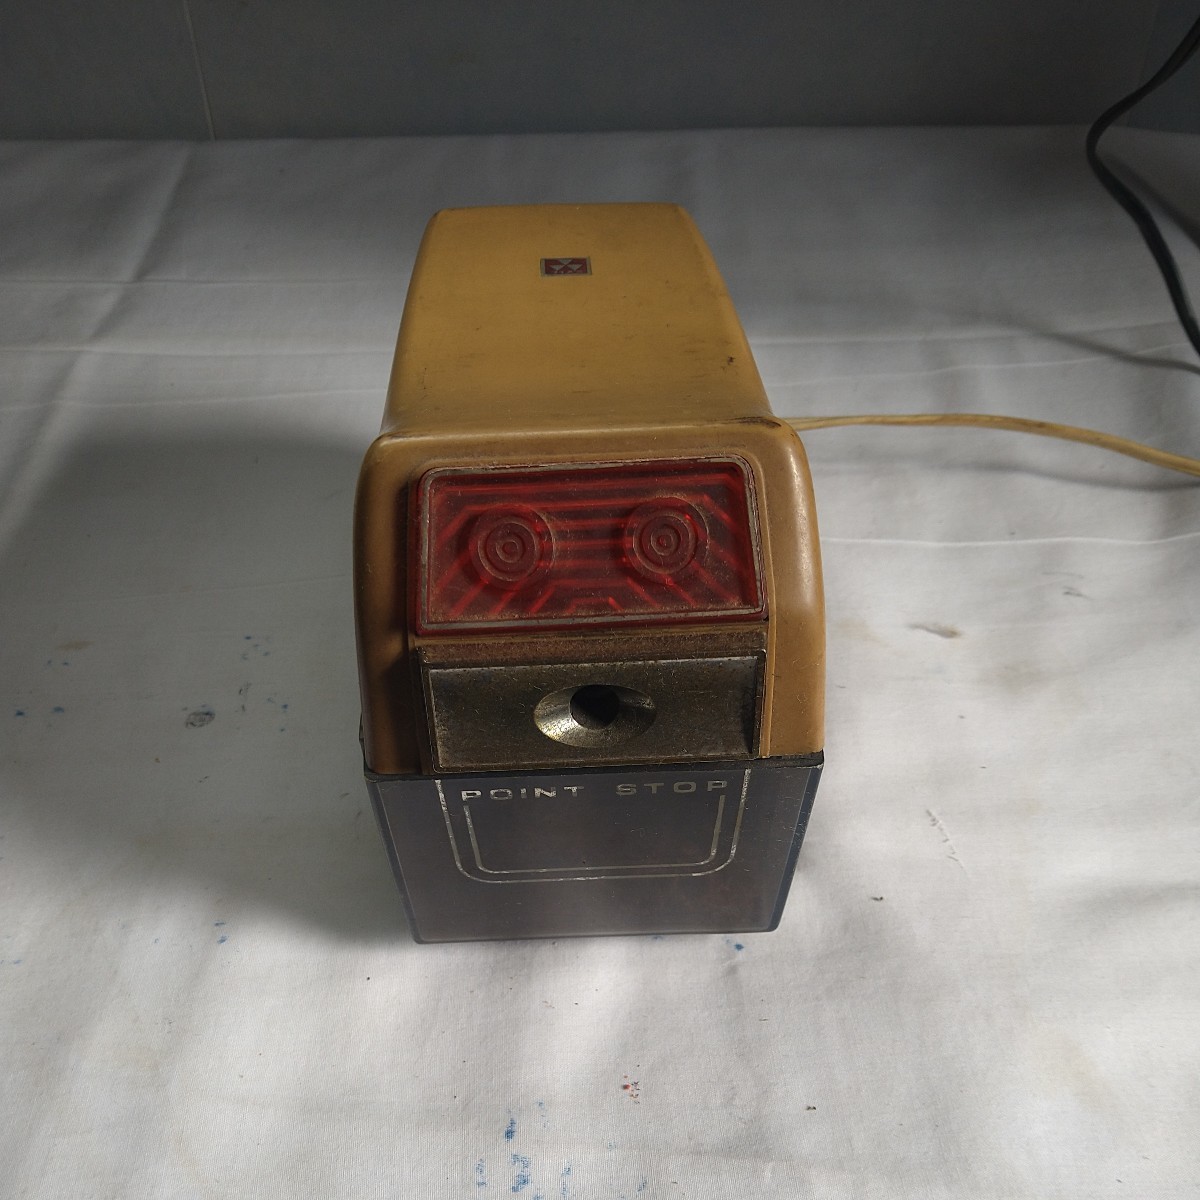 n-931* Koizumi writing desk electric pencil sharpener machine operation verification settled Showa Retro stationery * condition is in the image please confirm.